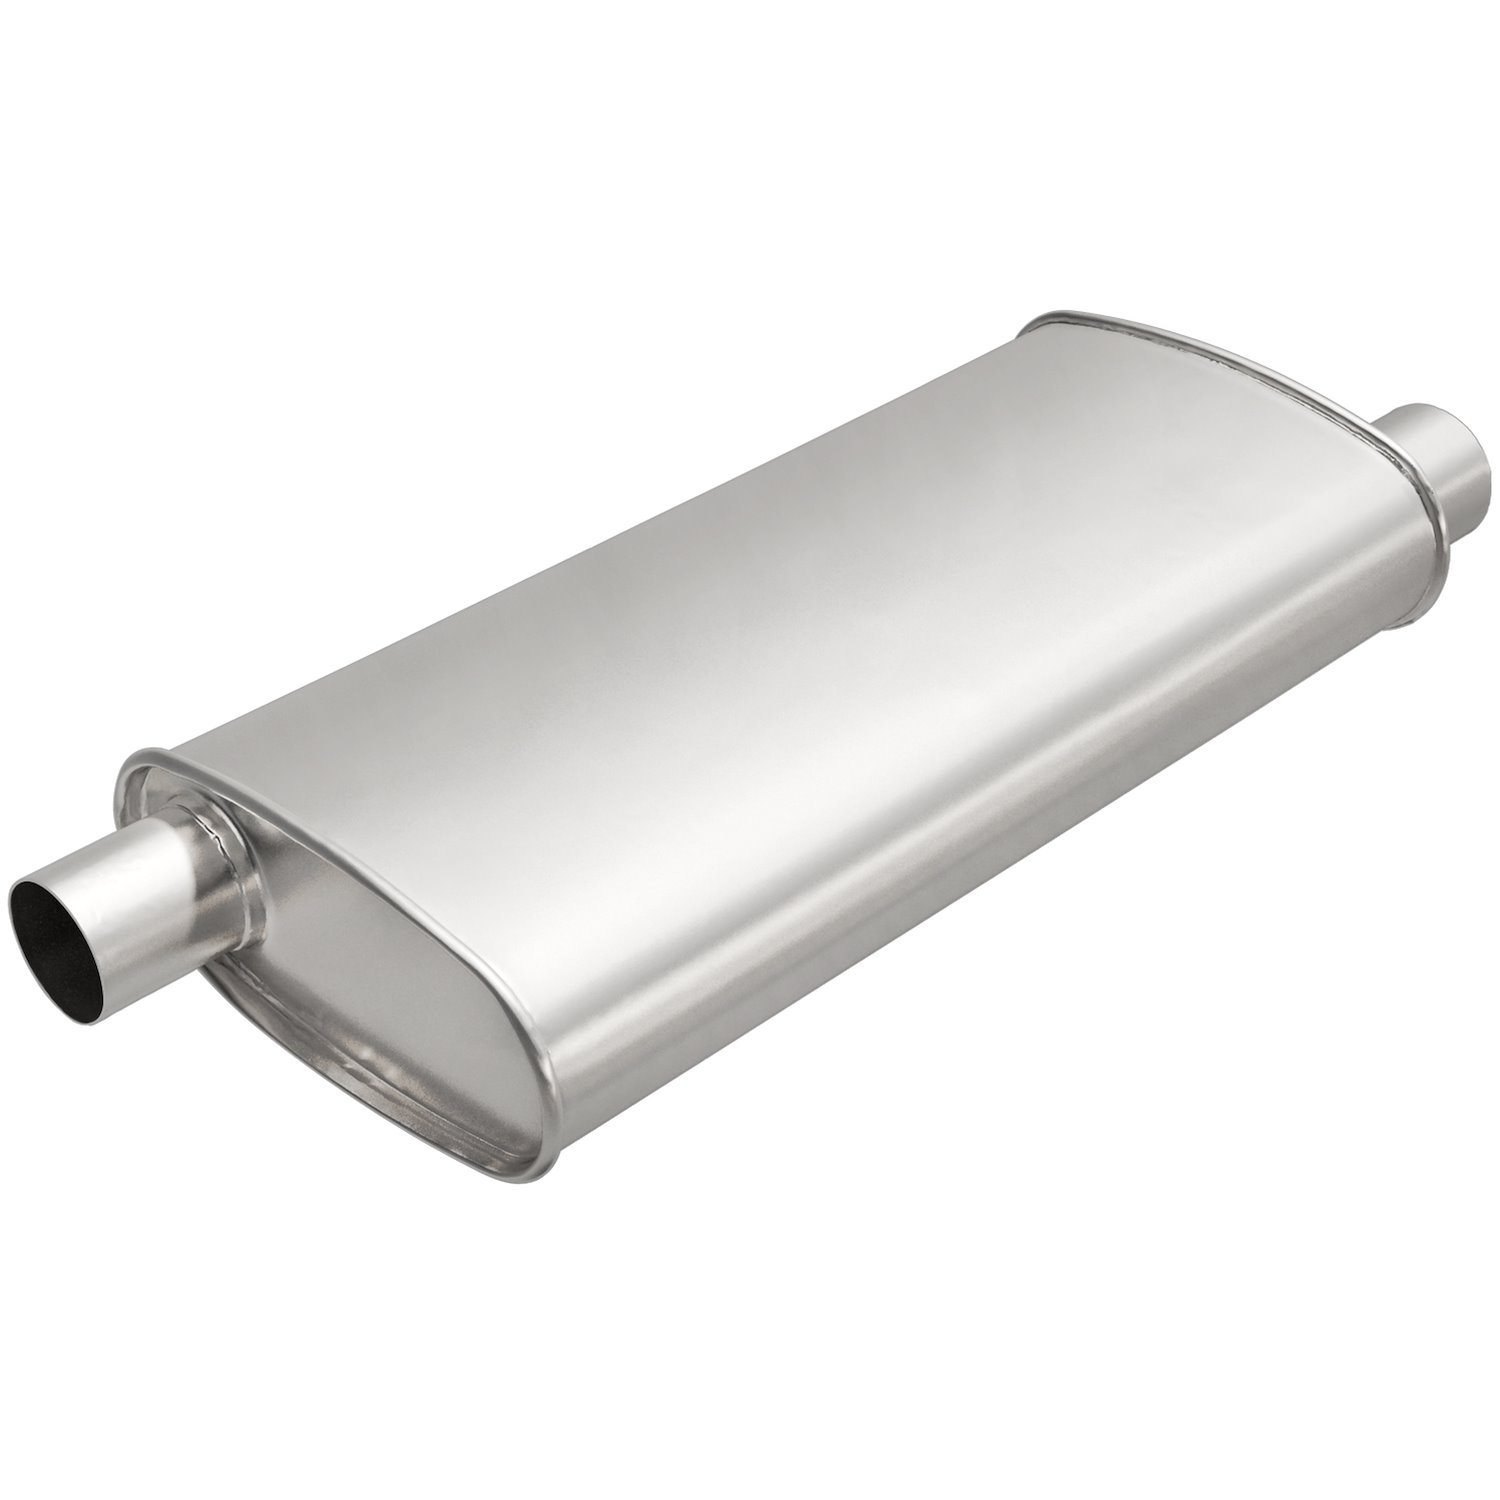 Universal Exhaust Muffler, Oval, Inlet/Outlet: 2.25 in./2 in. , Offset/Offset